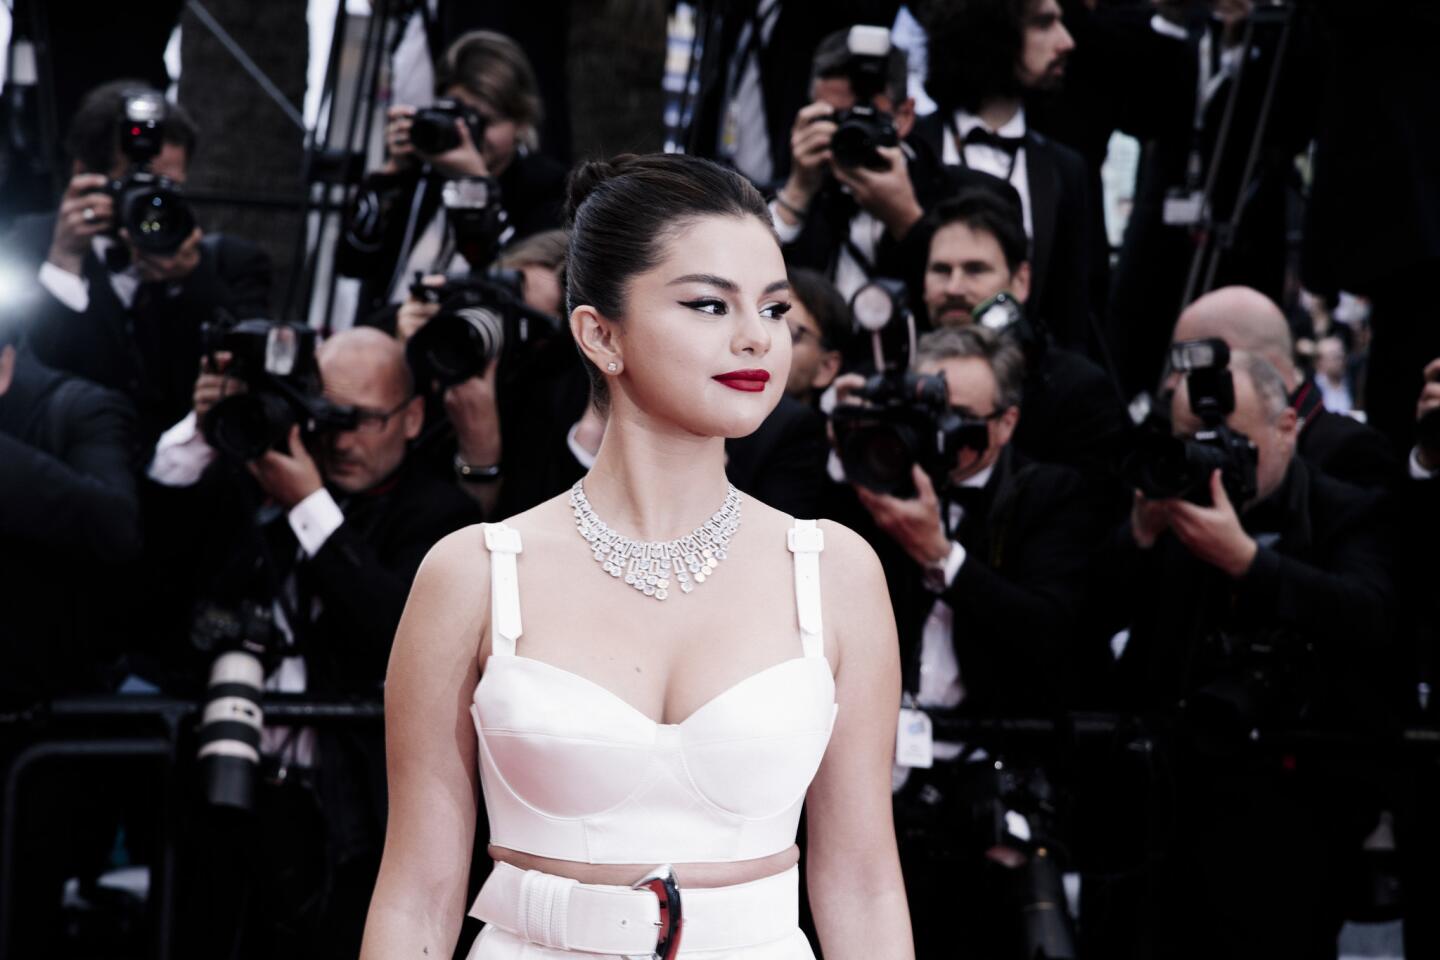 Selena Gomez attends the opening ceremony and screening of "The Dead Don't Die" during the 72nd annual Cannes Film Festival on May 14, 2019 in Cannes, France.